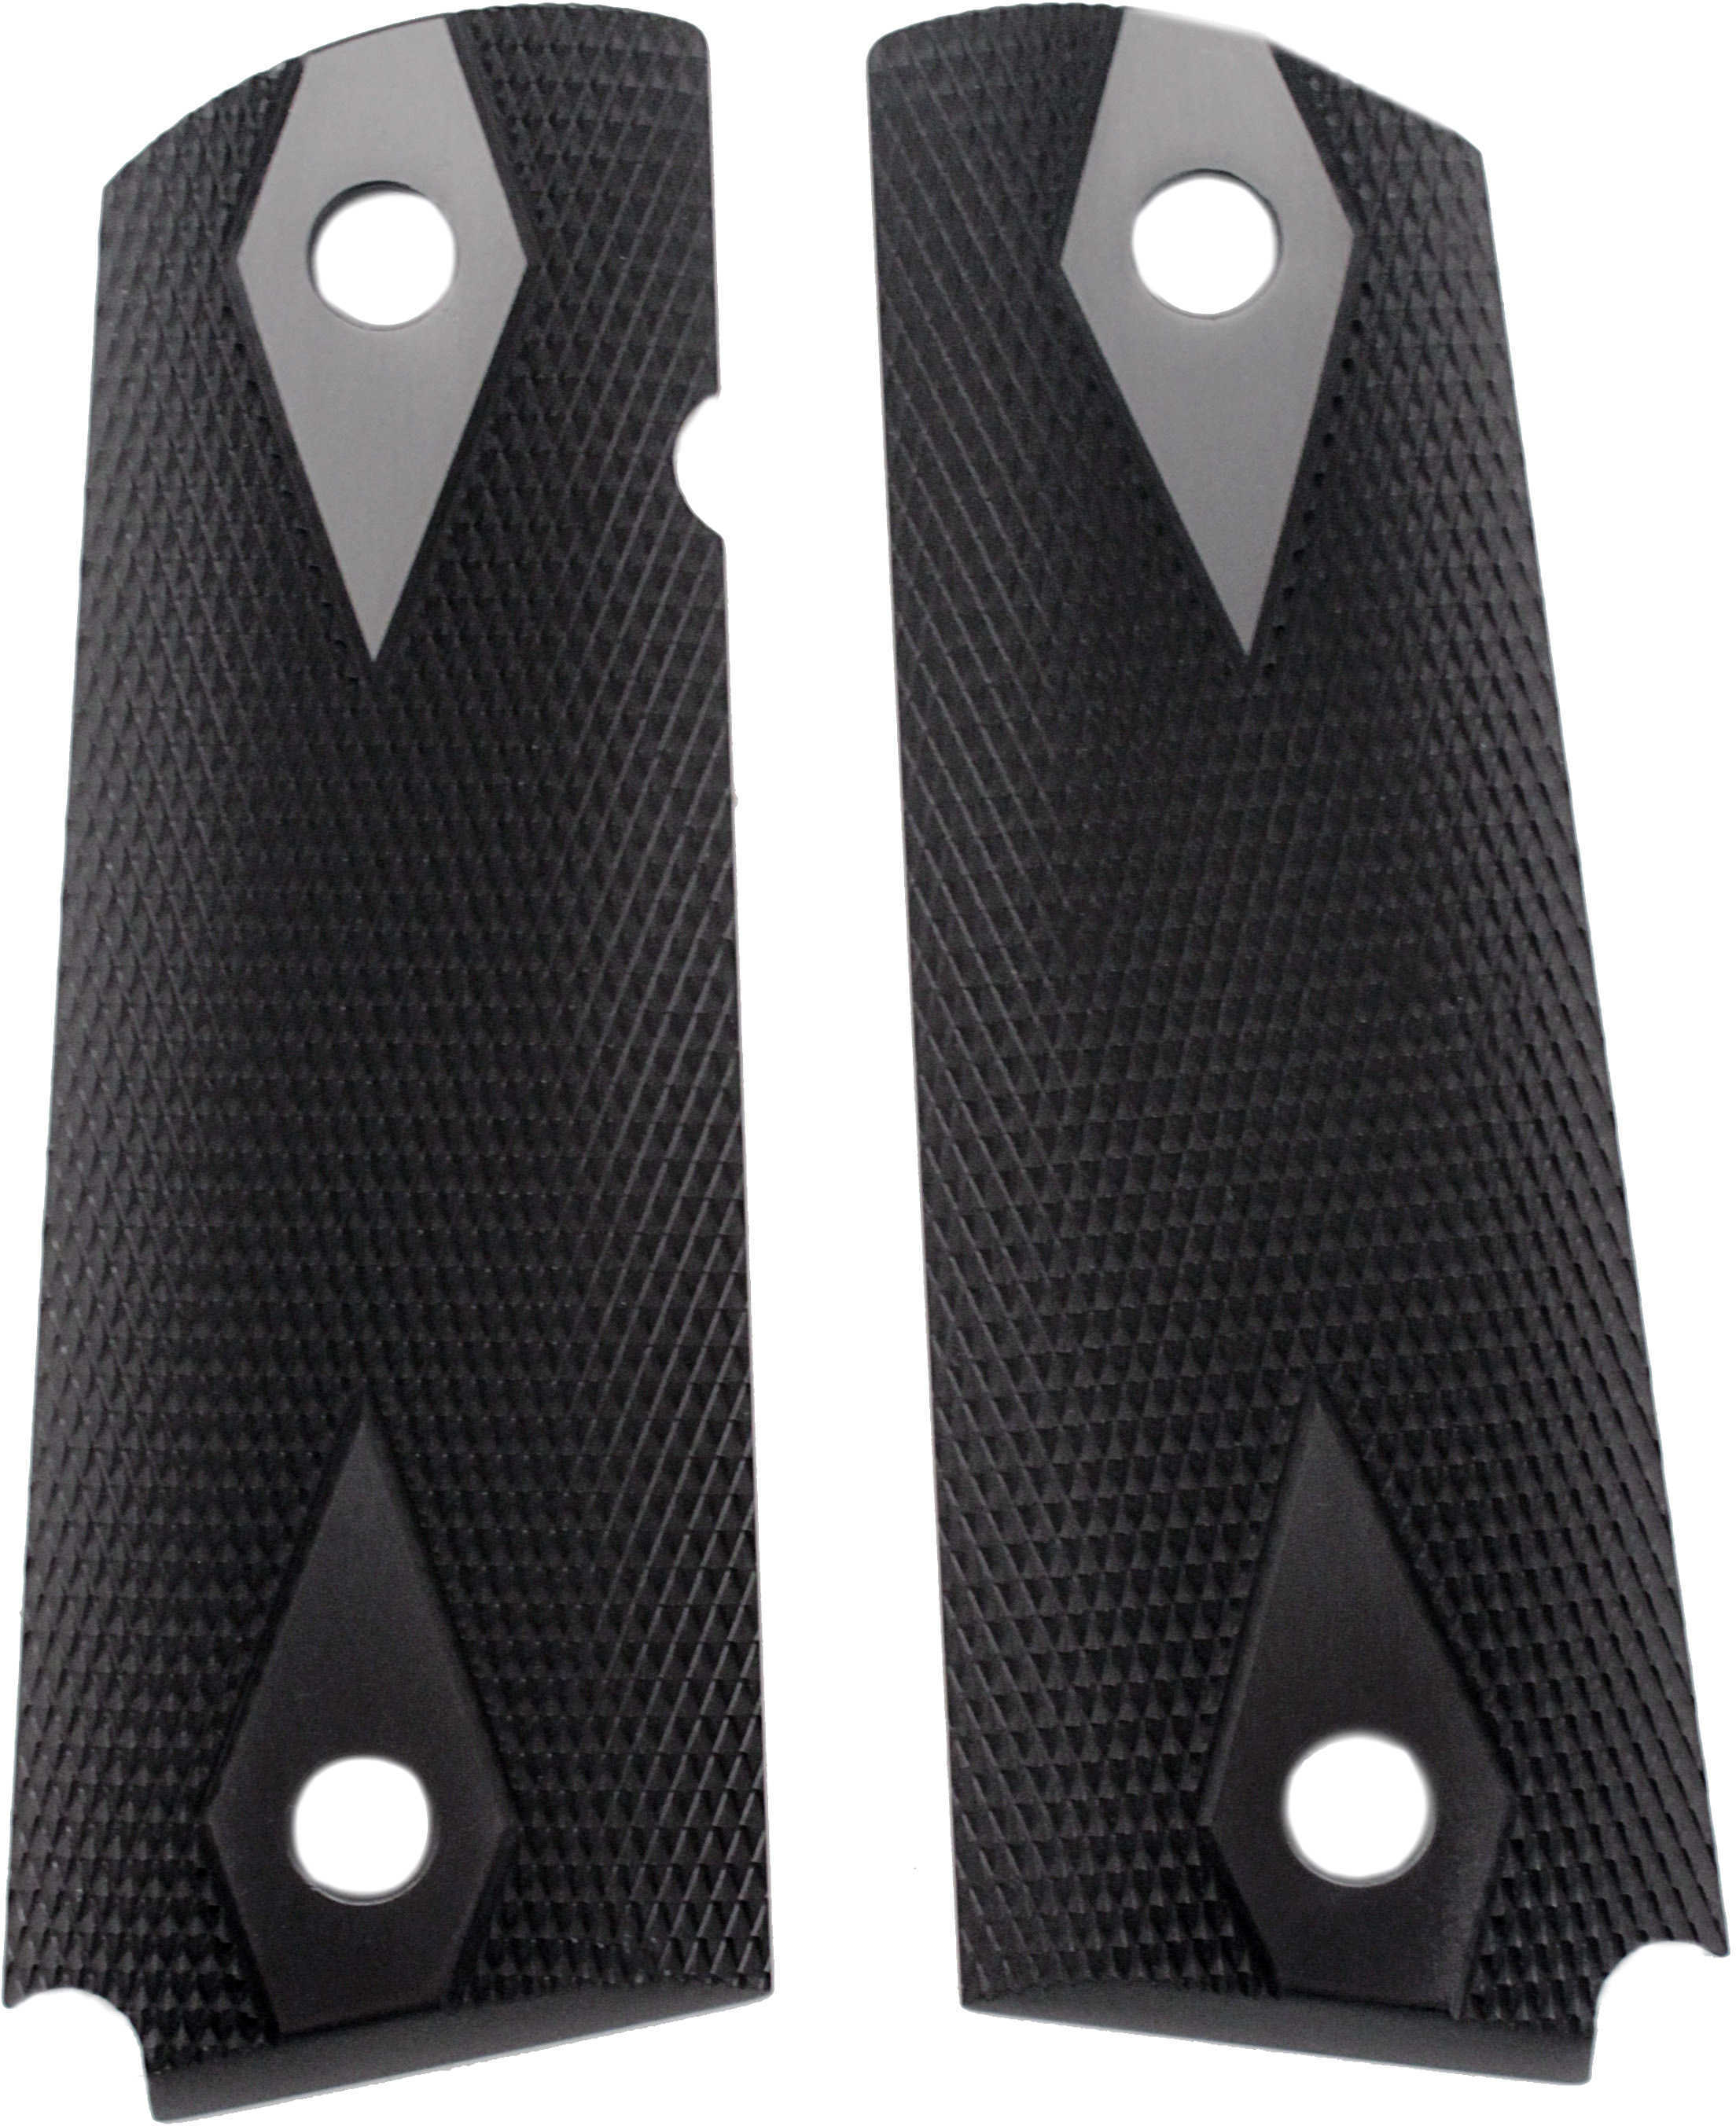 Hogue 1911 Government/Commander 3/16" Thin Grips Aluminum Checkered Brushed Gloss Black Anodized 01476